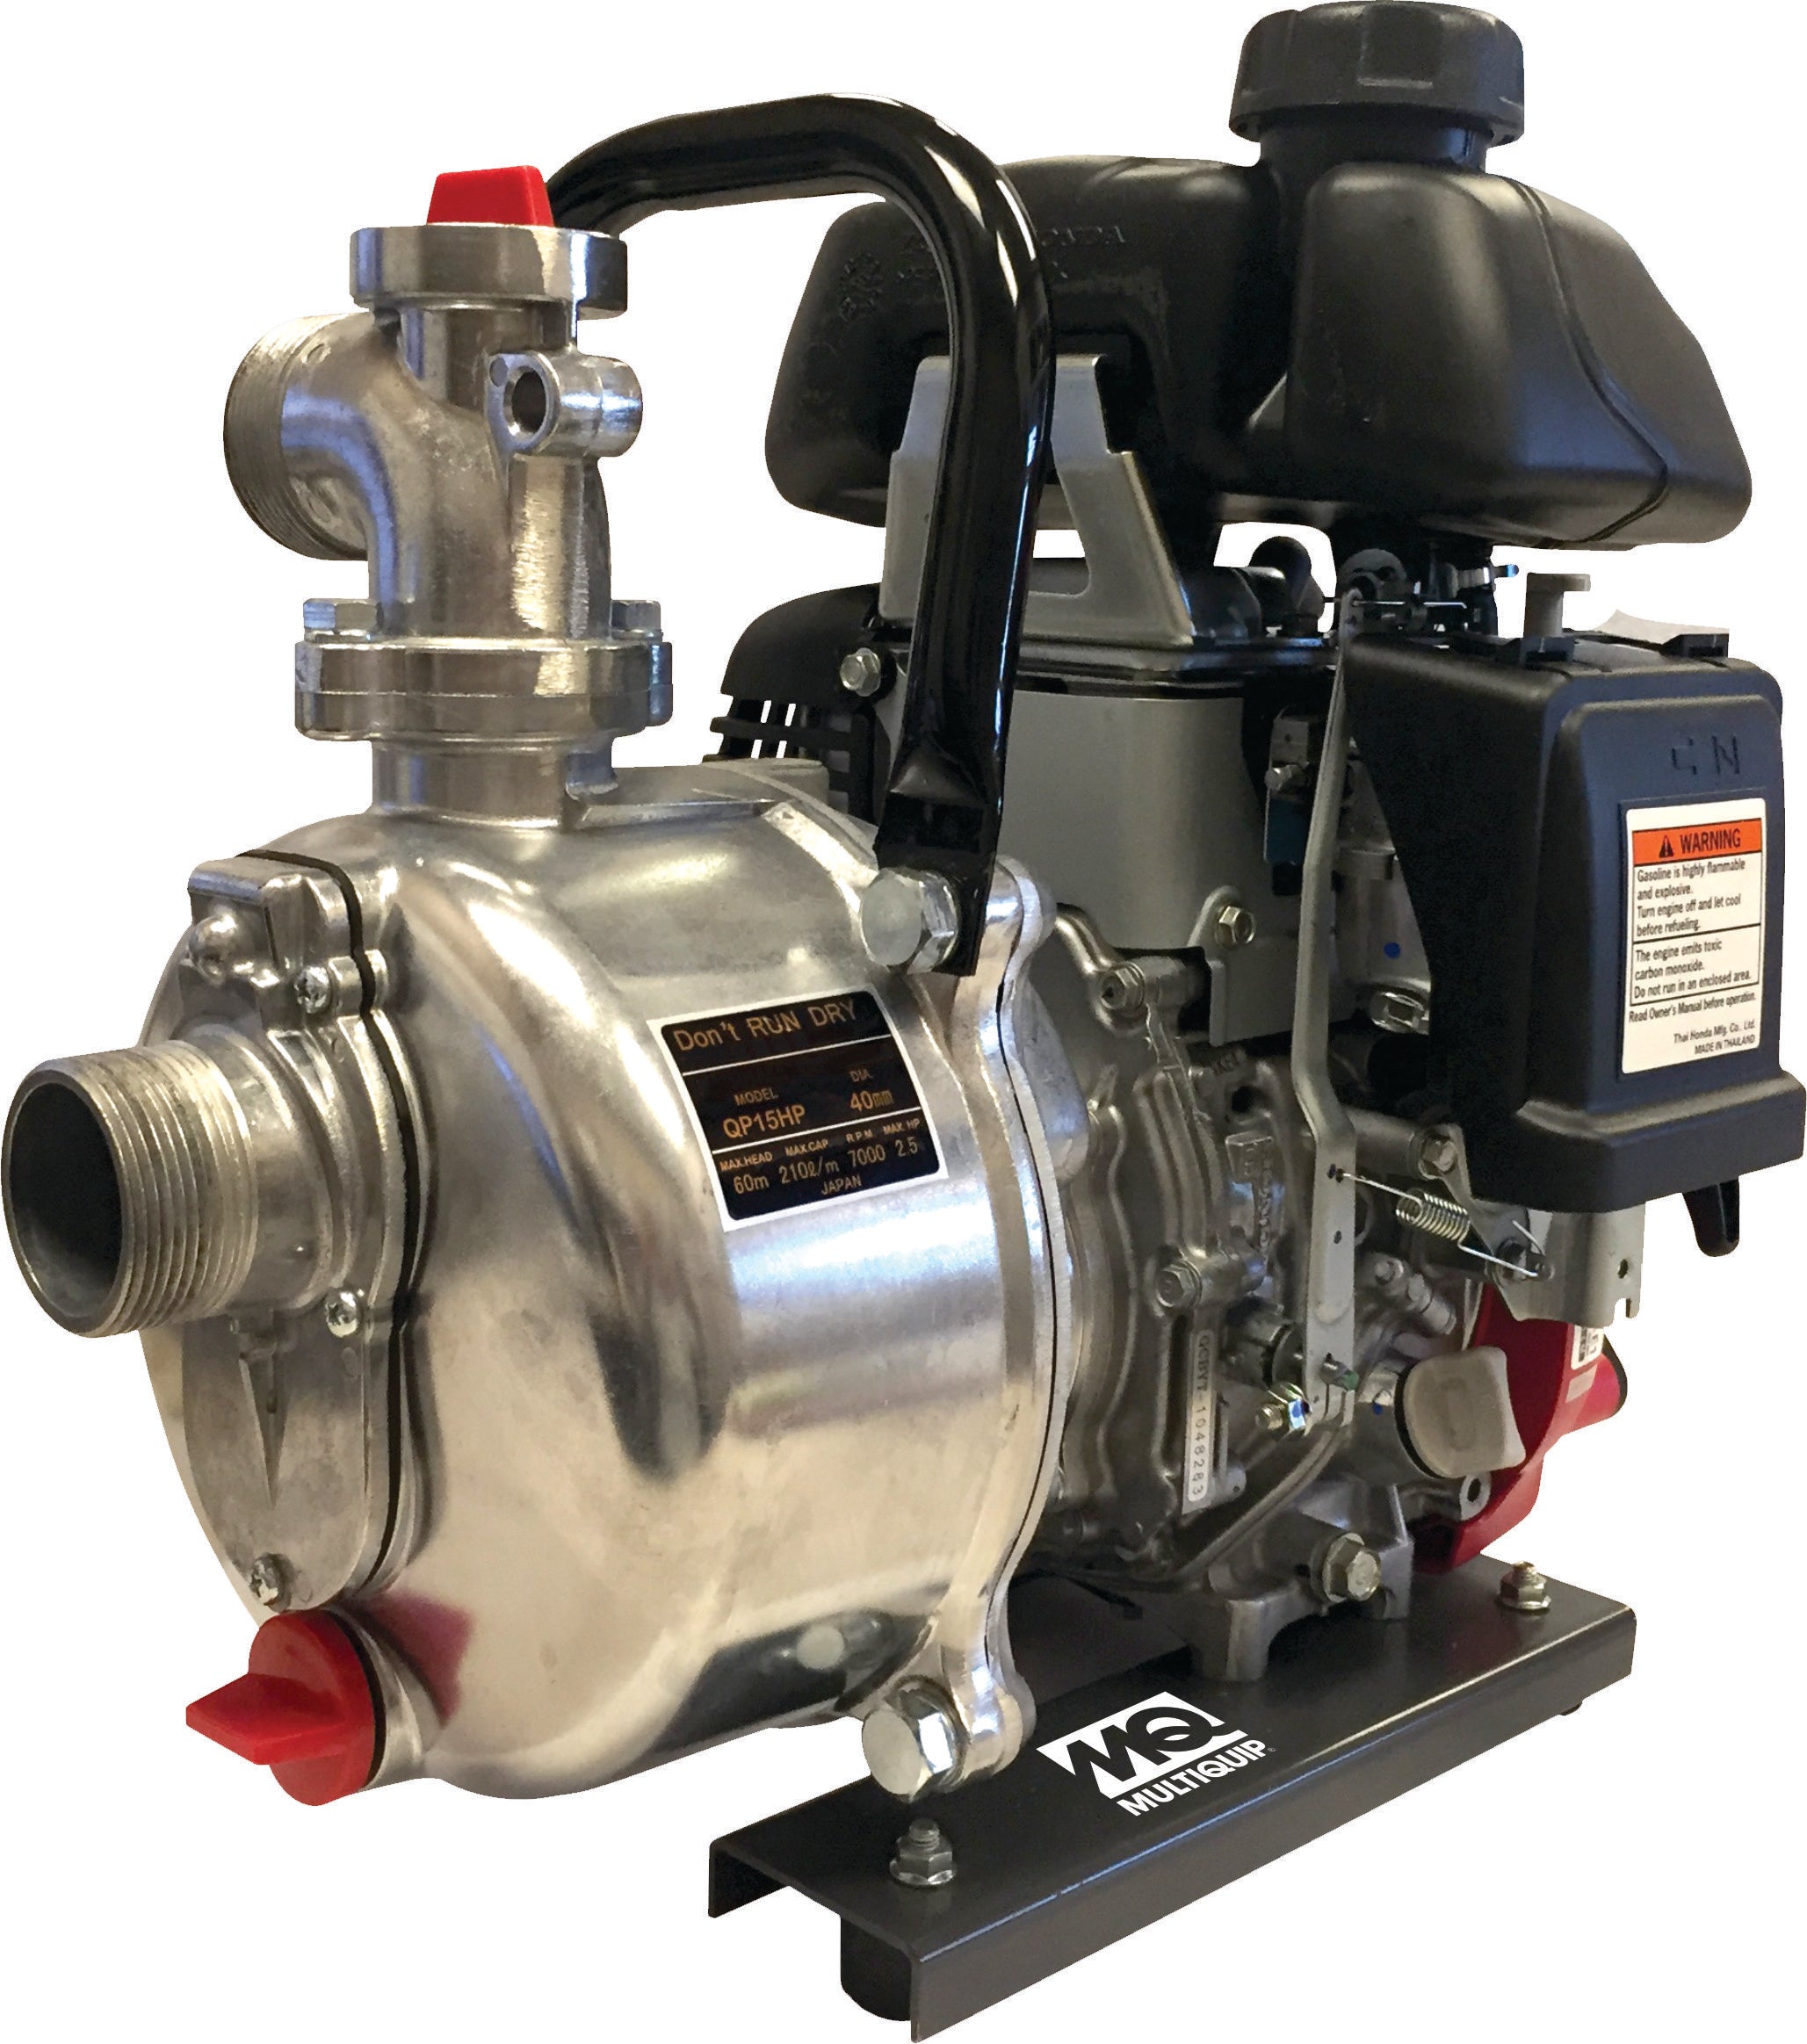 Multiquip QP15HP 1.5-Inch High Pressure Dewatering Pump with Honda Gas Engine | 56 GPM